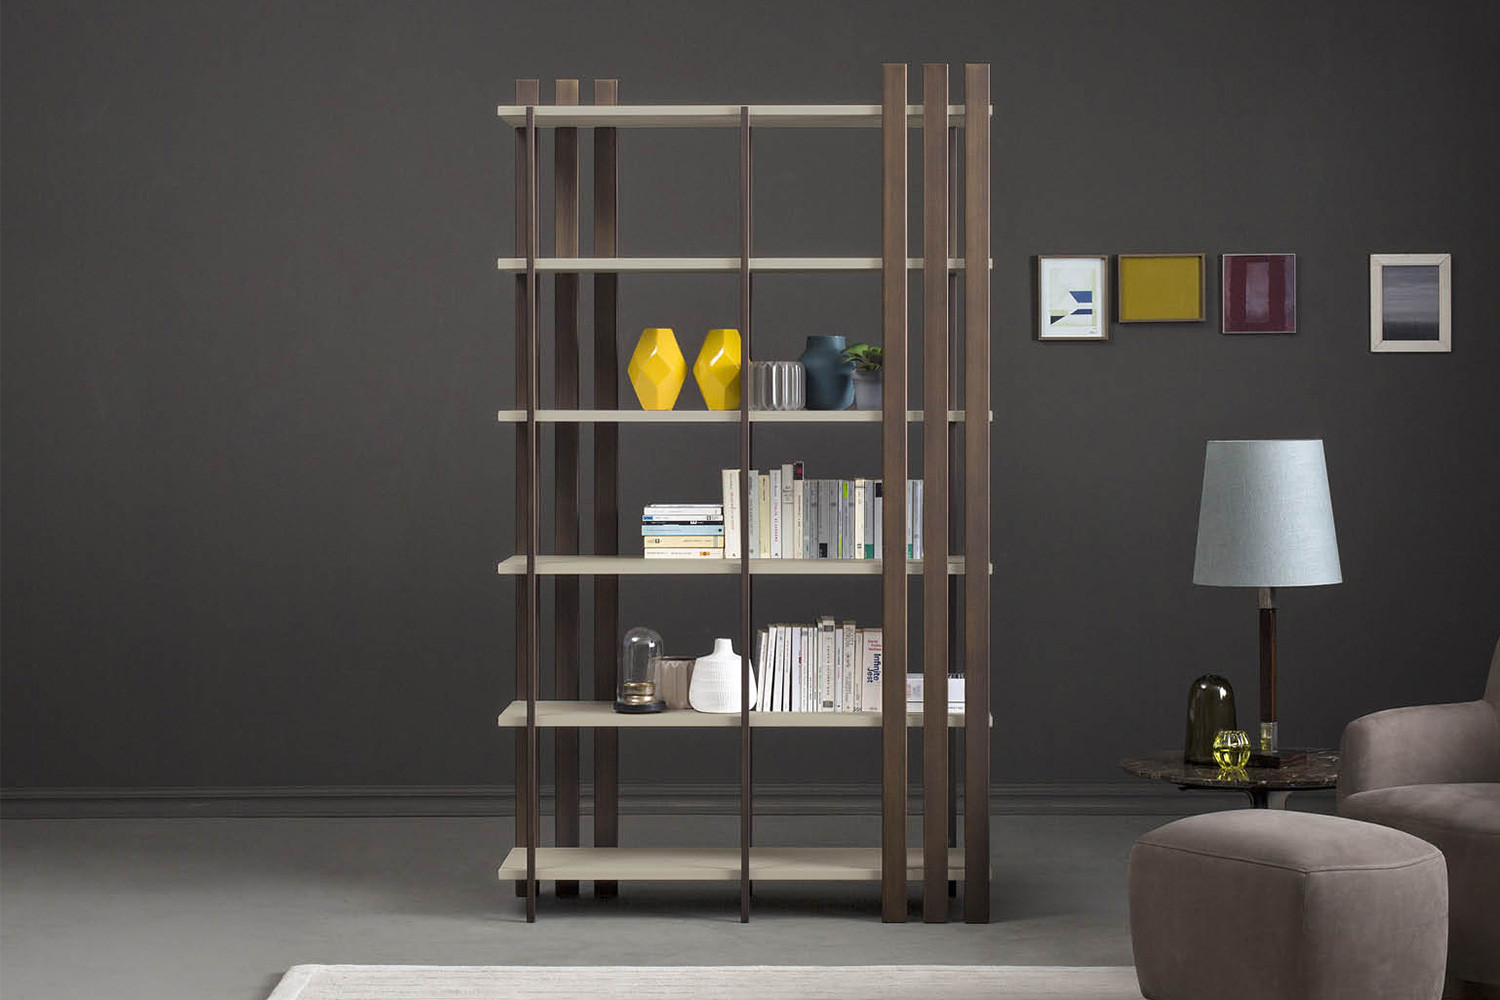 Tall free standing 6-shelf bookcase with walnut or lacquer shelves held together by 10 metal rods